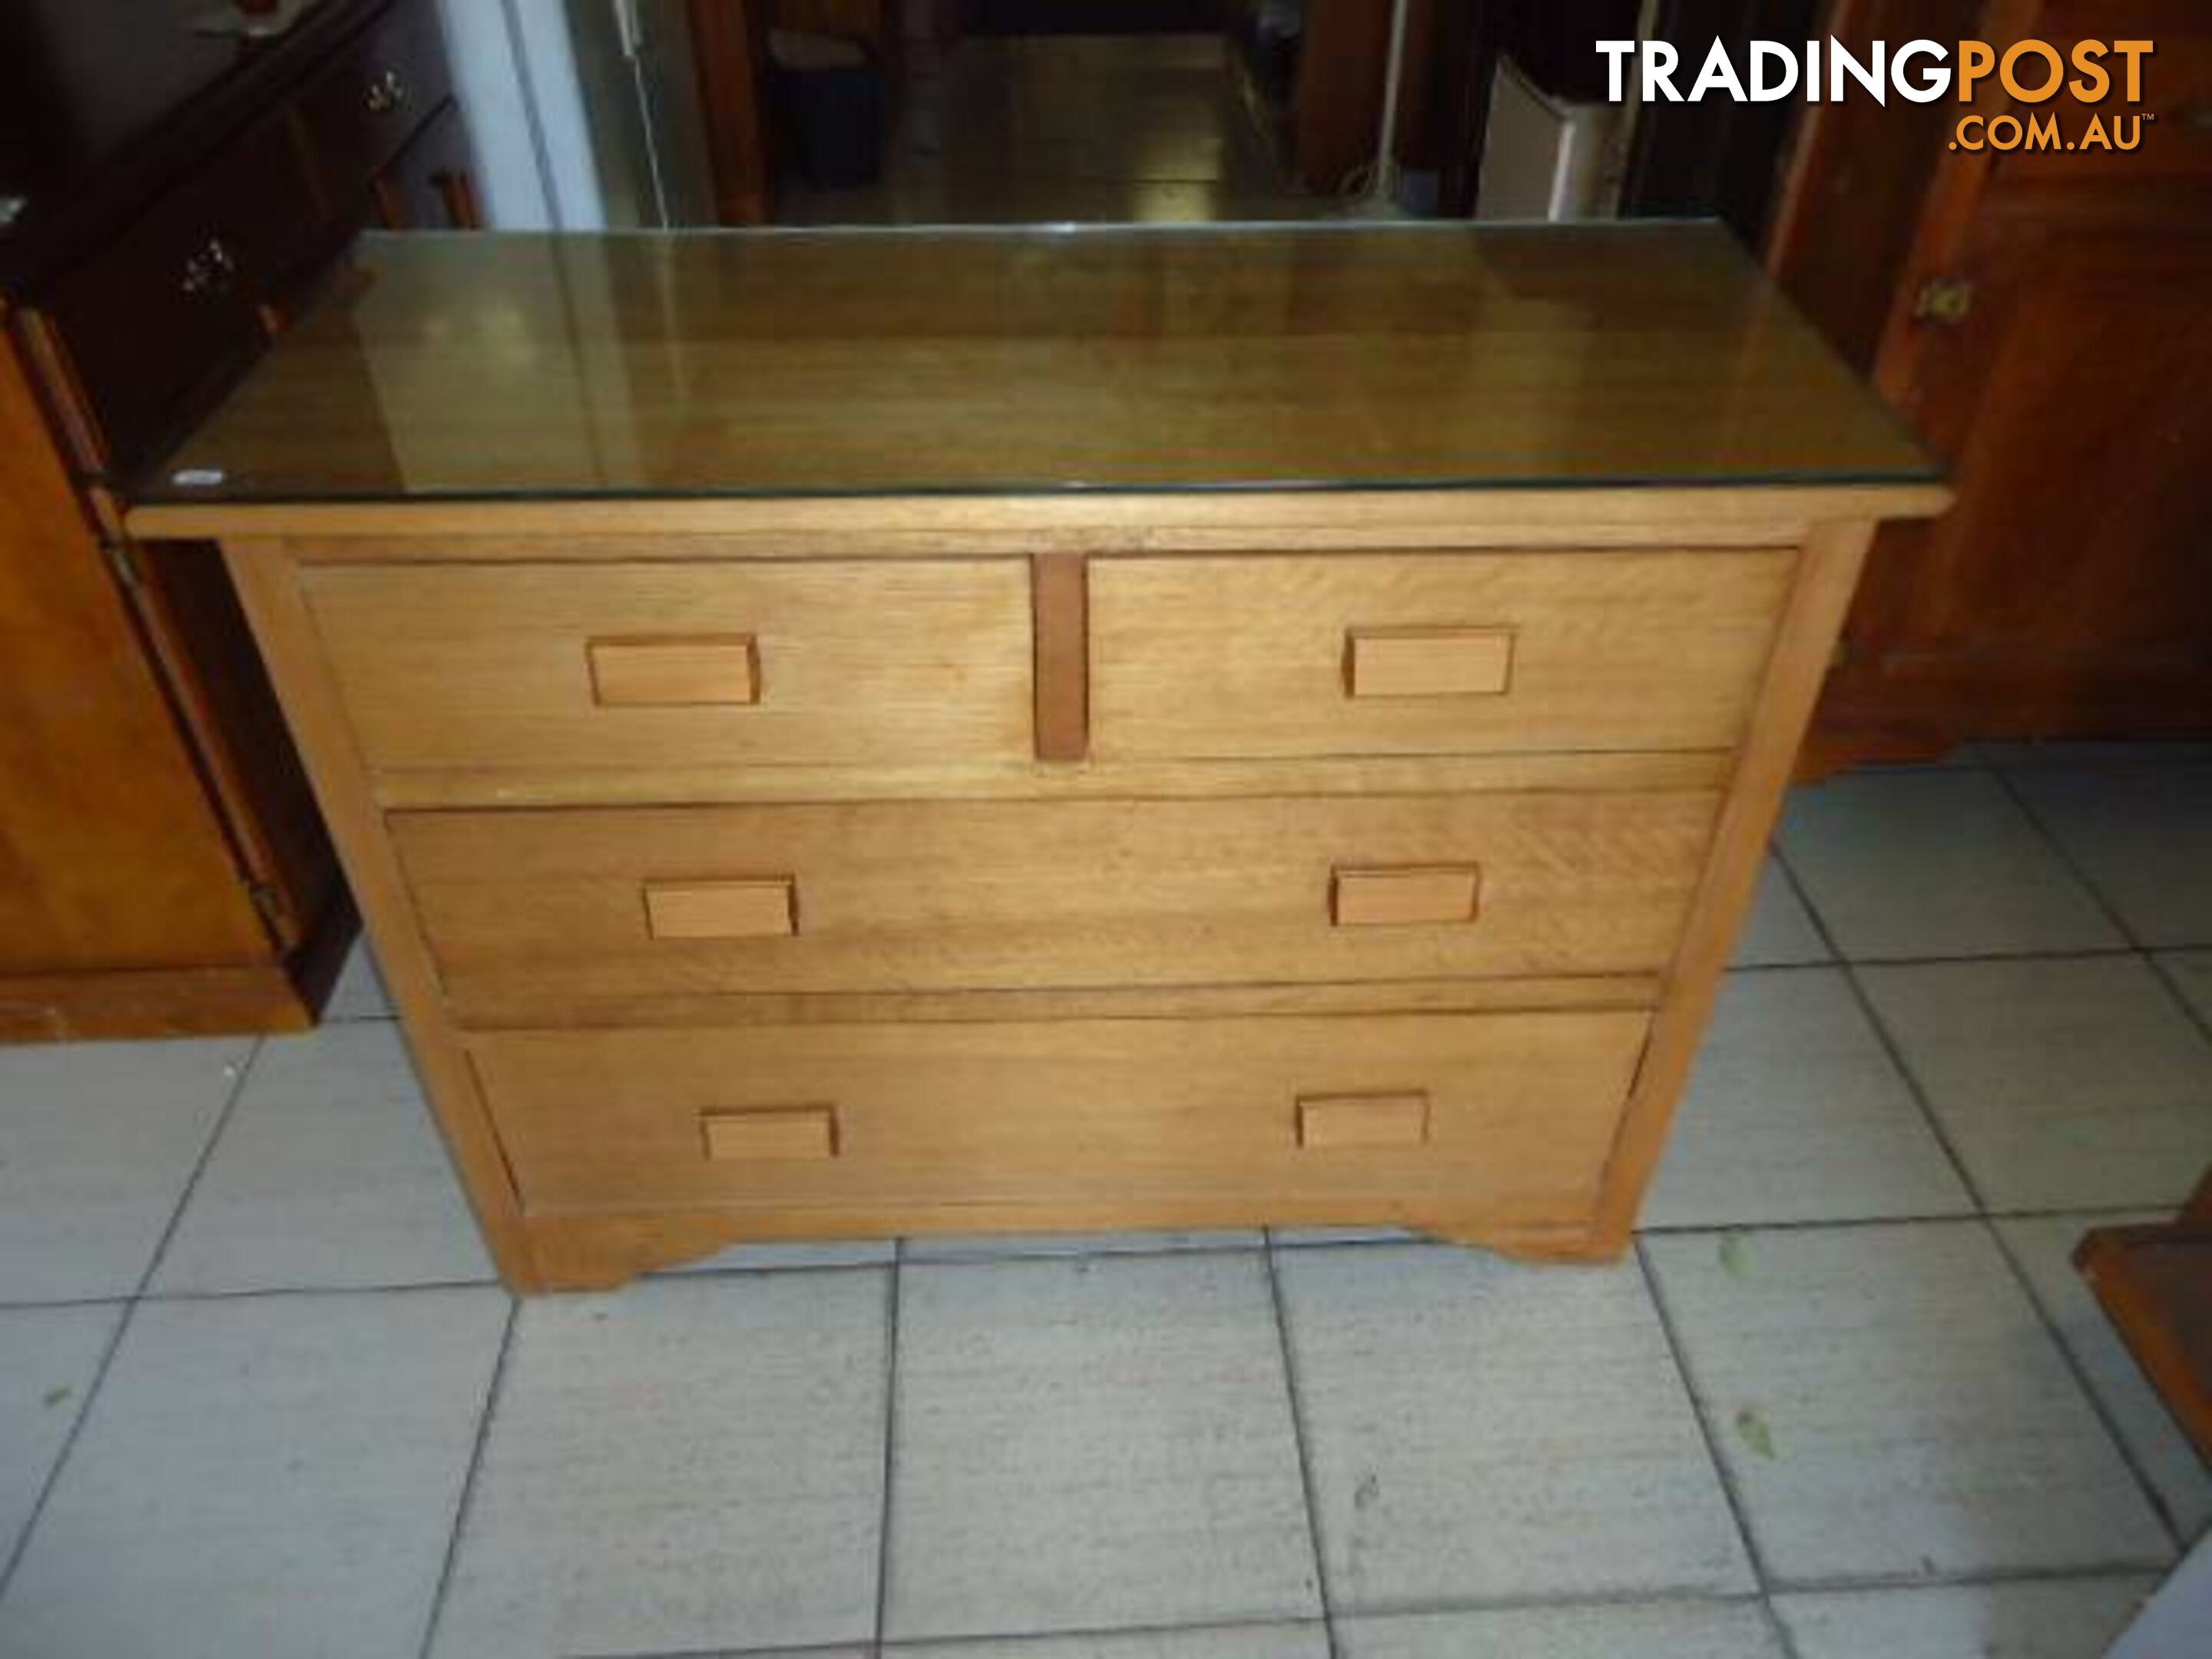 SOLID WOOD CHEST OF DRAWERS with GLASS COVER. GREAT CONDITION